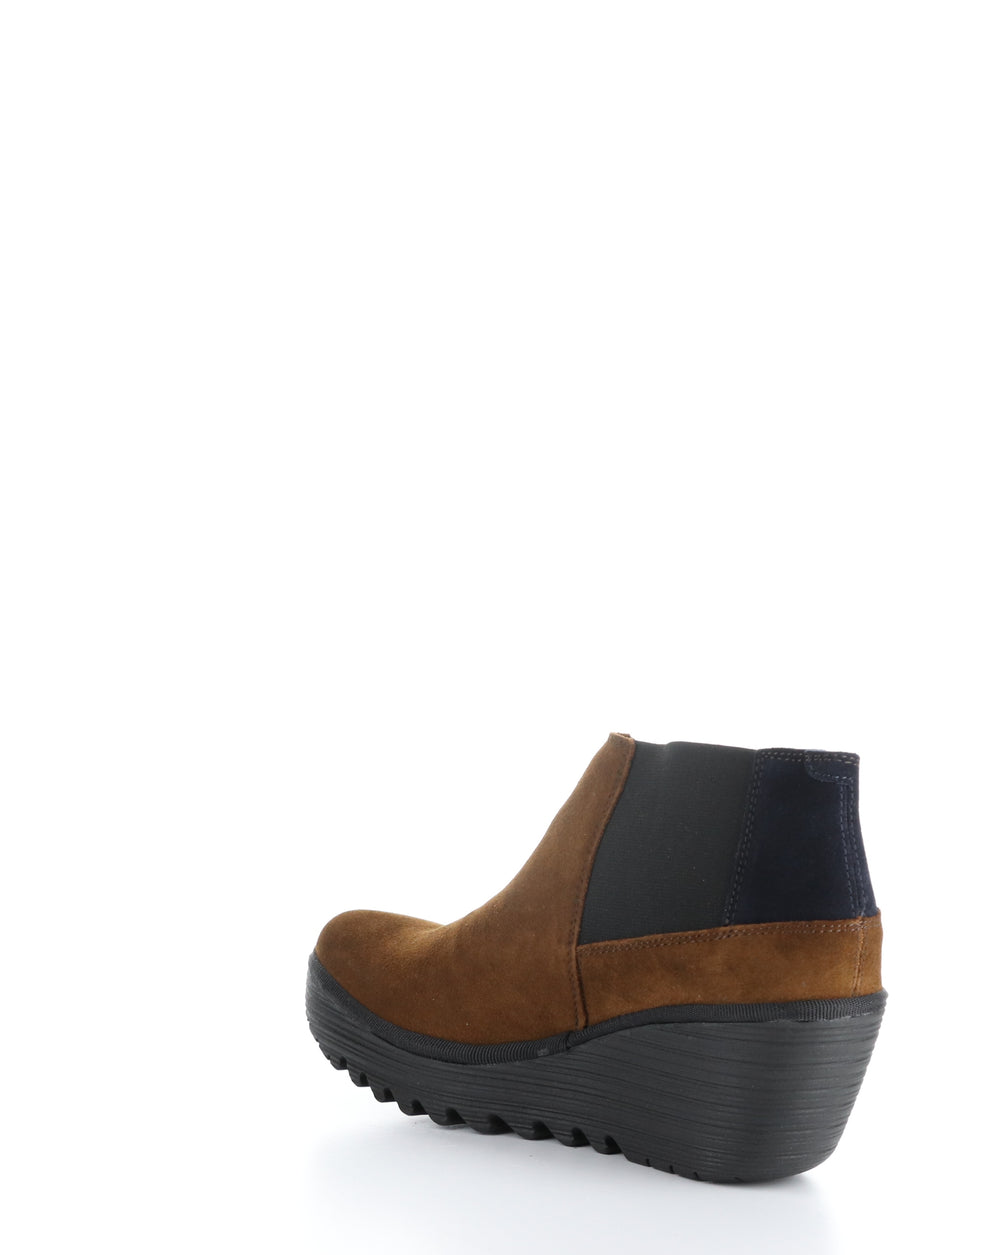 YEGO400FLY 010 CAMEL/NAVY Elasticated Boots